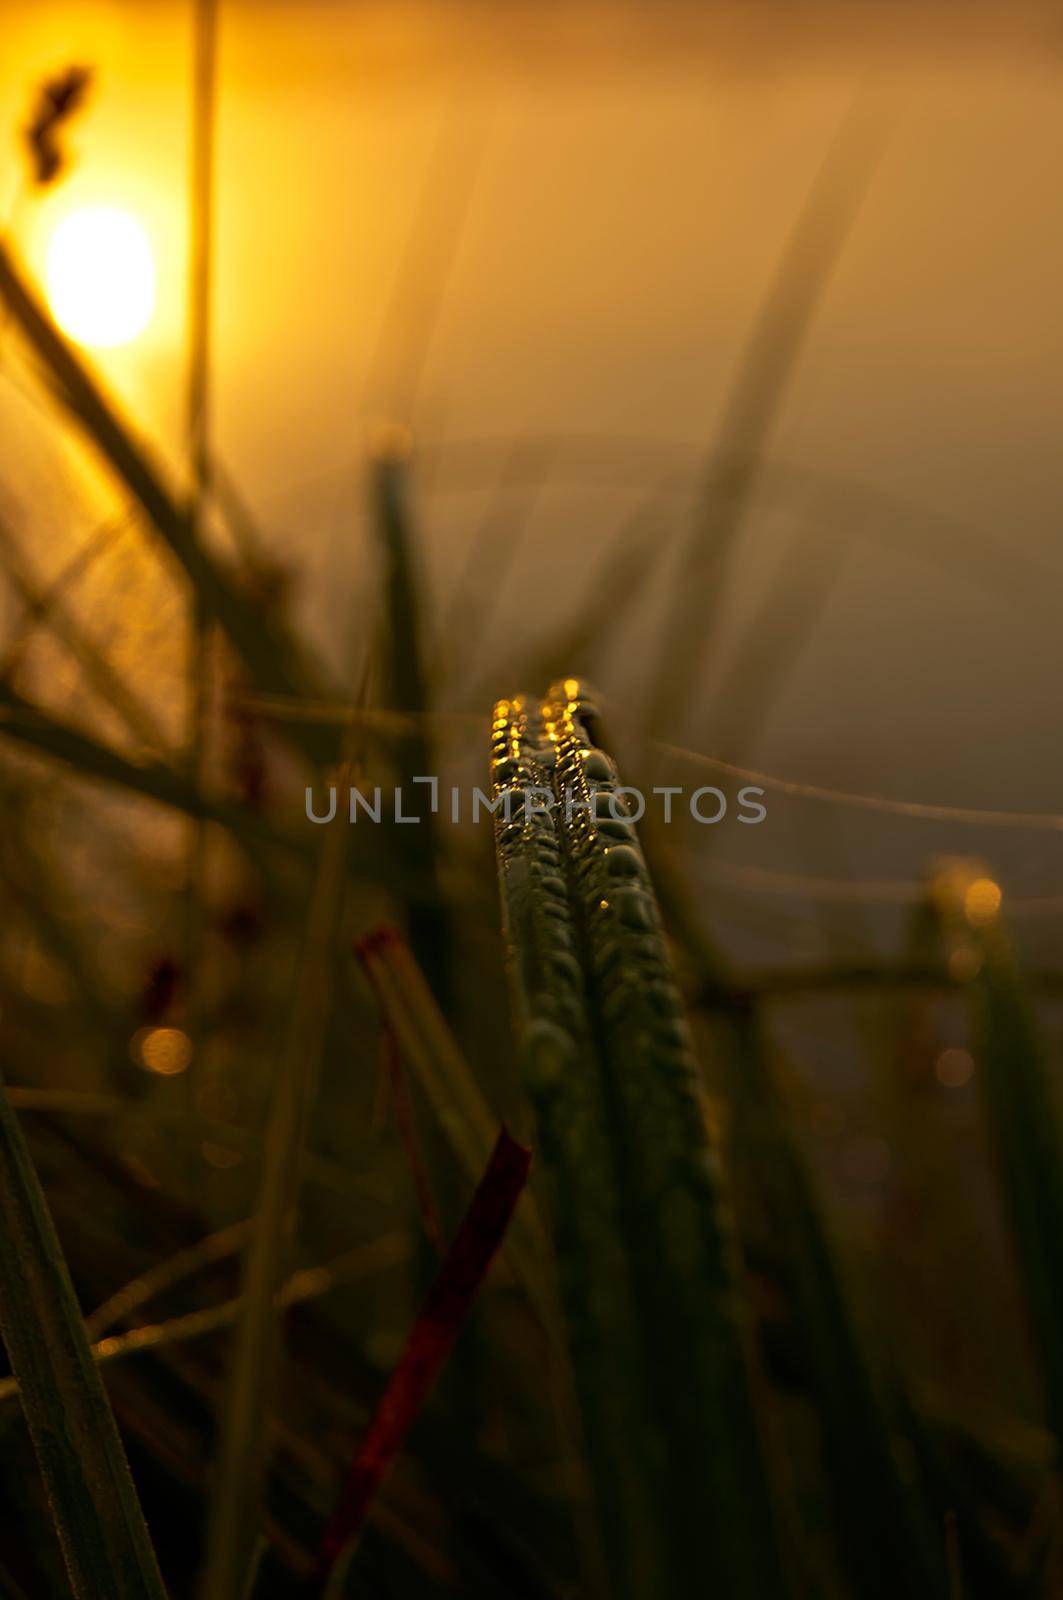 Lake at sunset, coastal grass and trees. light of the sunset above the water. by DePo